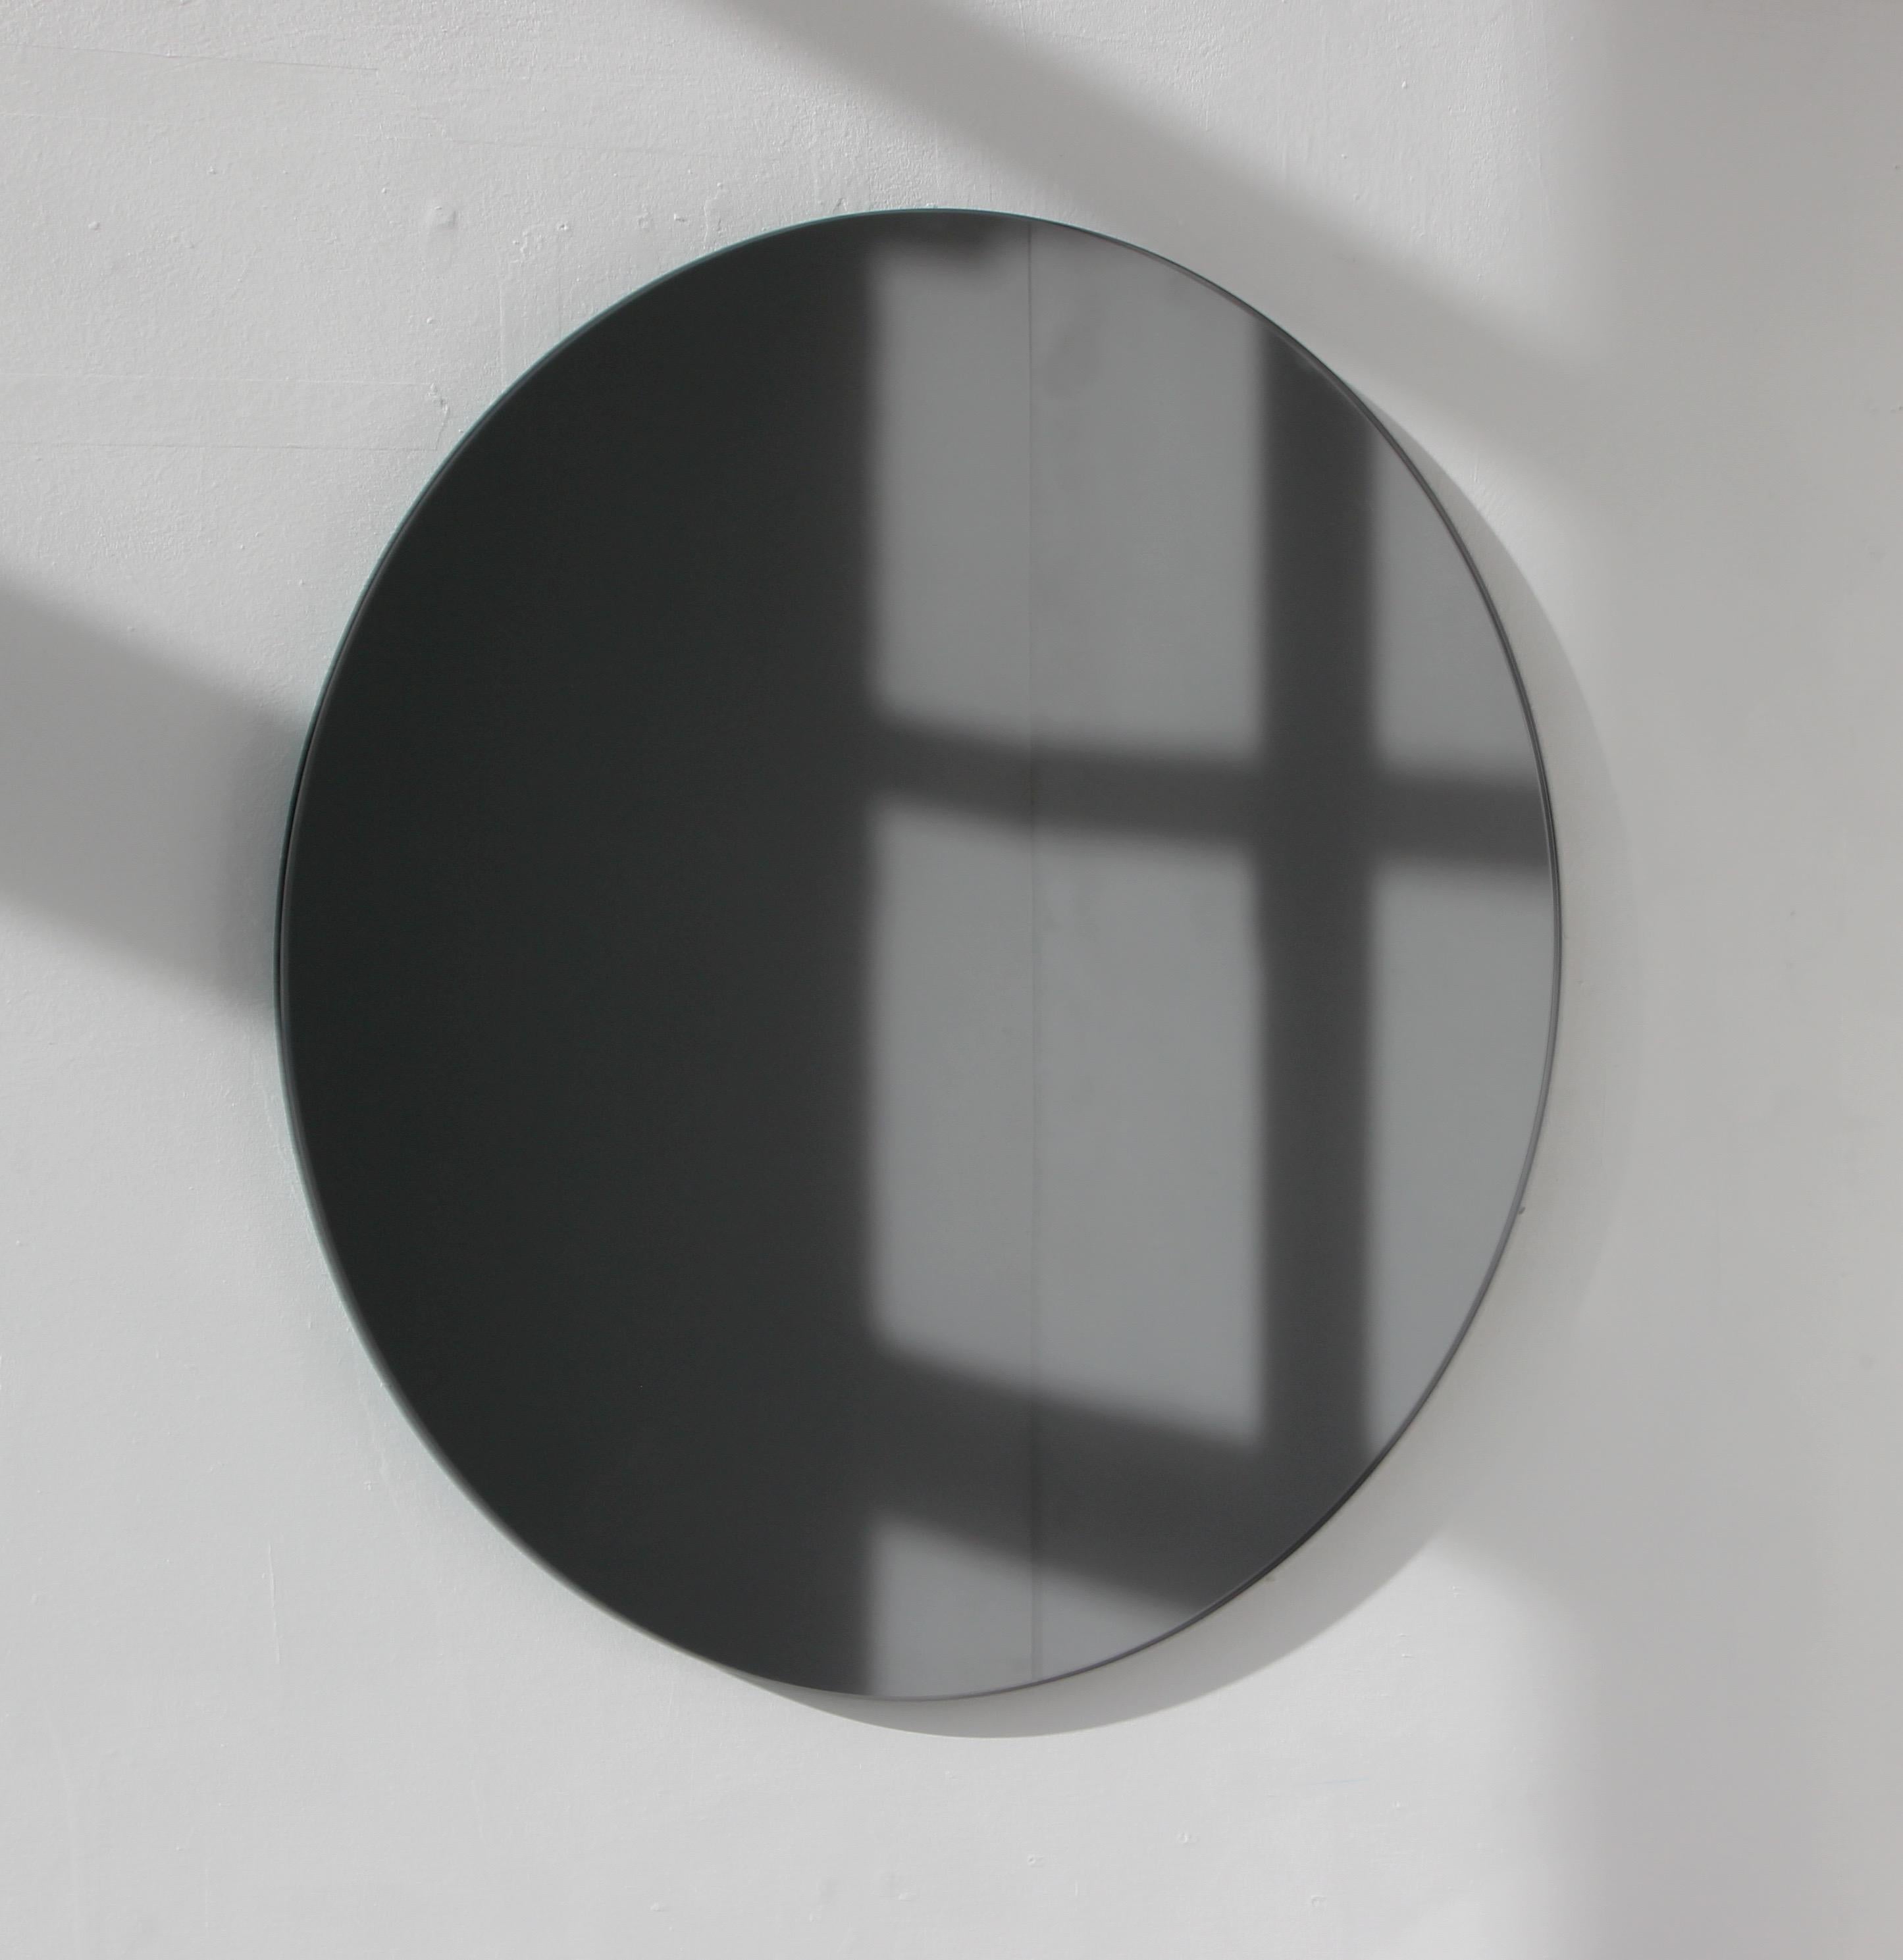 Charming and minimalist black tinted round frameless mirror with a floating effect. Quality design that ensures the mirror sits perfectly parallel to the wall. Designed and made in London, UK.

Fitted with professional plates not visible once